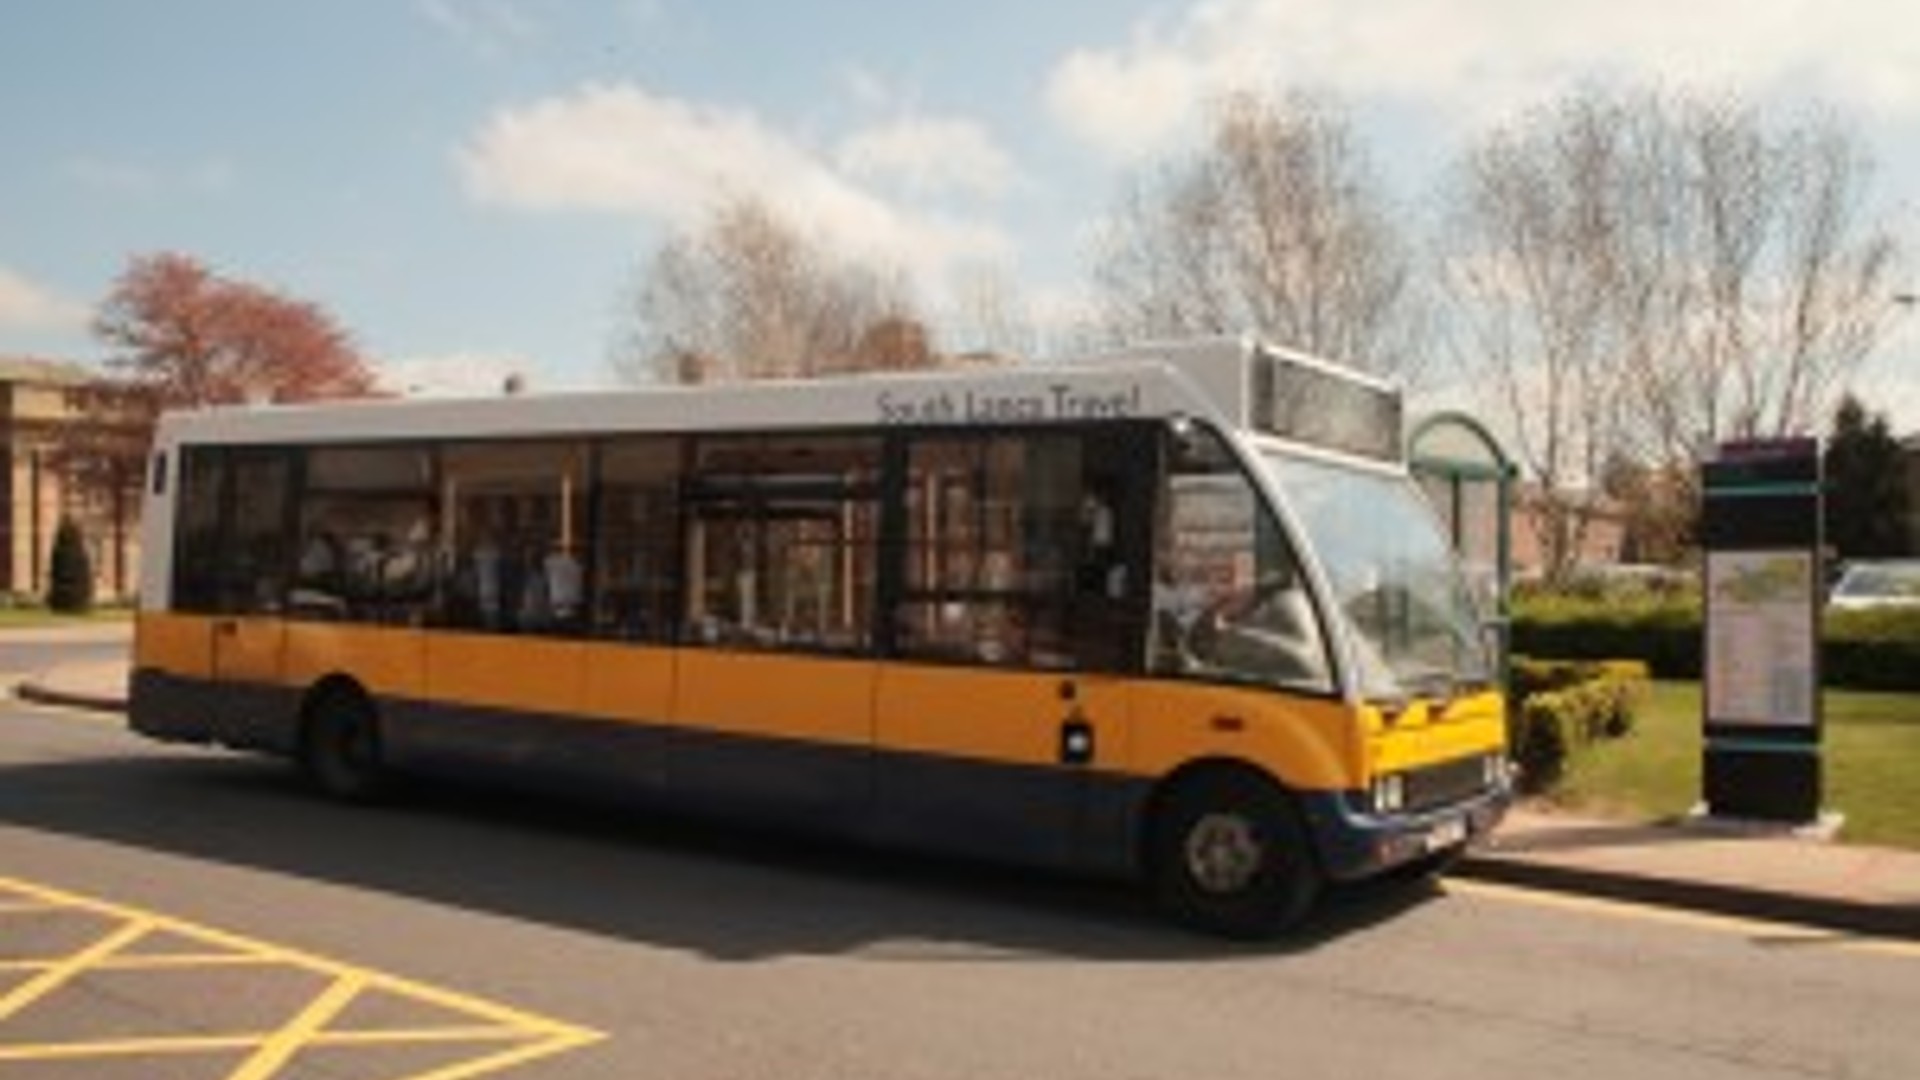 An image of the bus that goes between Edge Hill University campus and the town centre of Ormskirk.